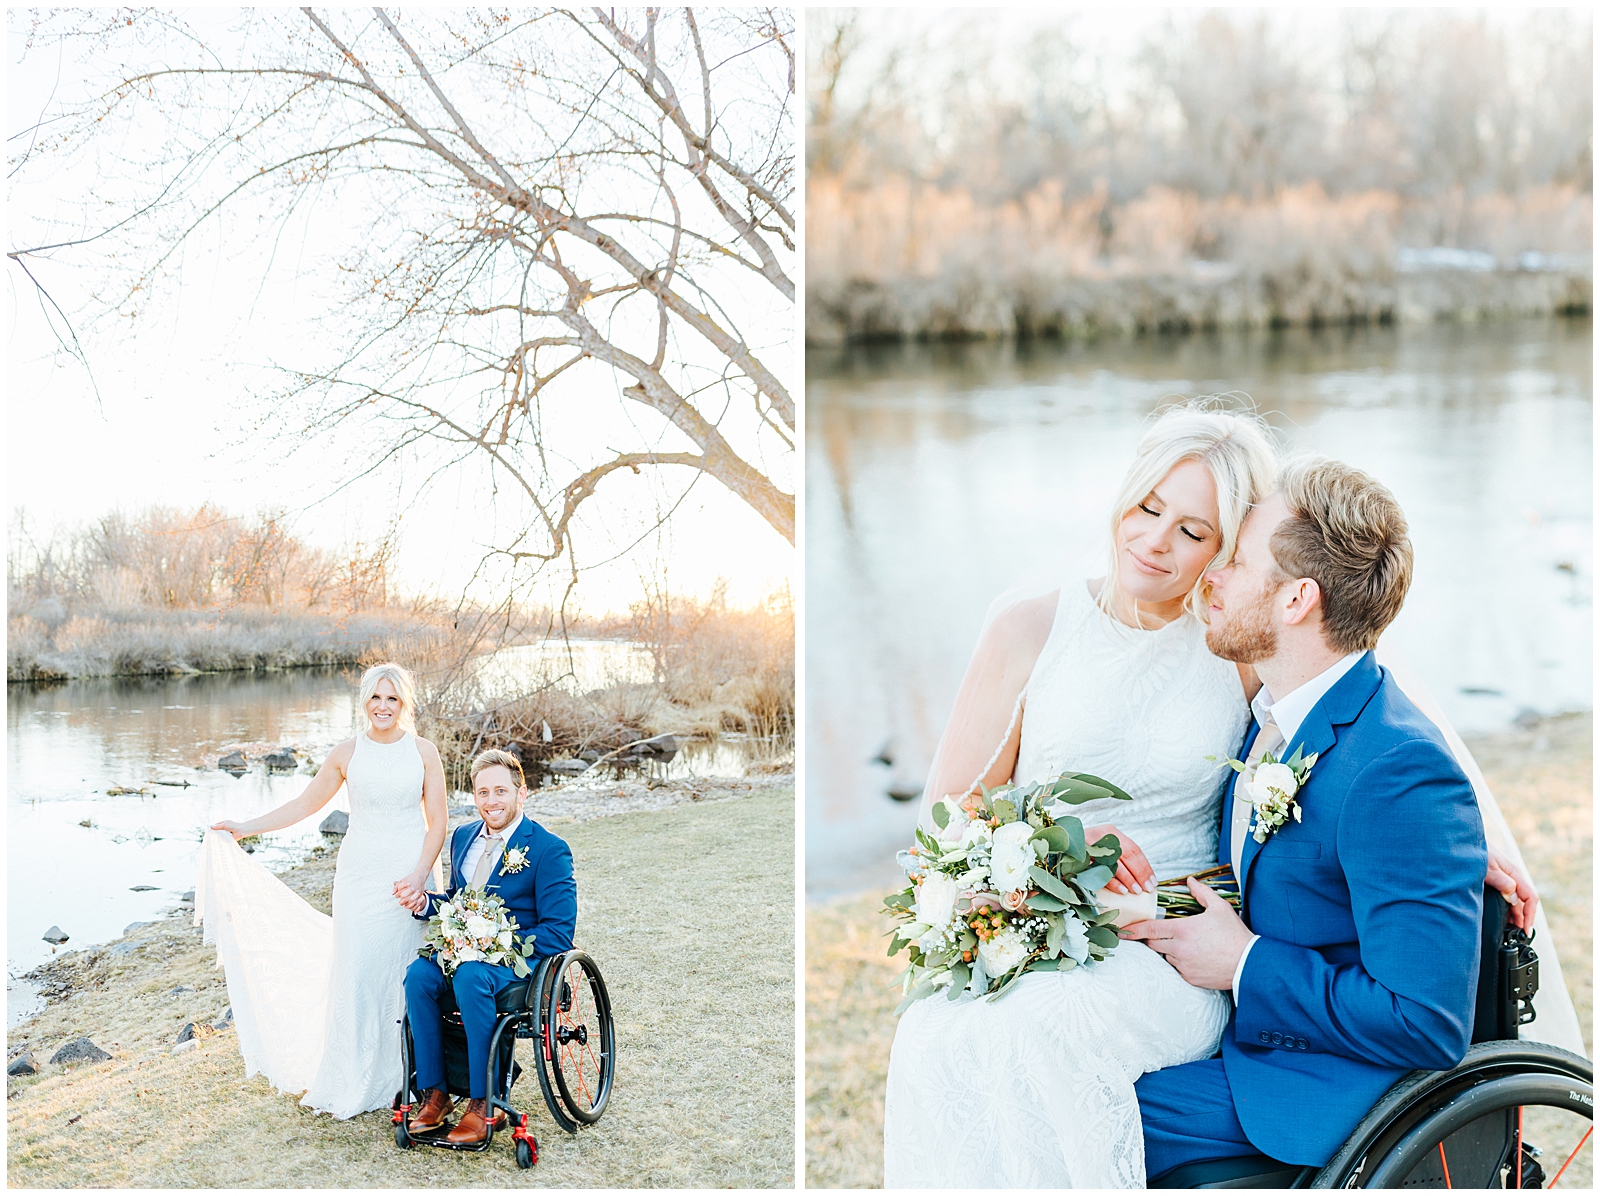 Husband and Wife Golden Hour Portraits at Heartfelt Idaho Spring Elopement Groom Paralyzed